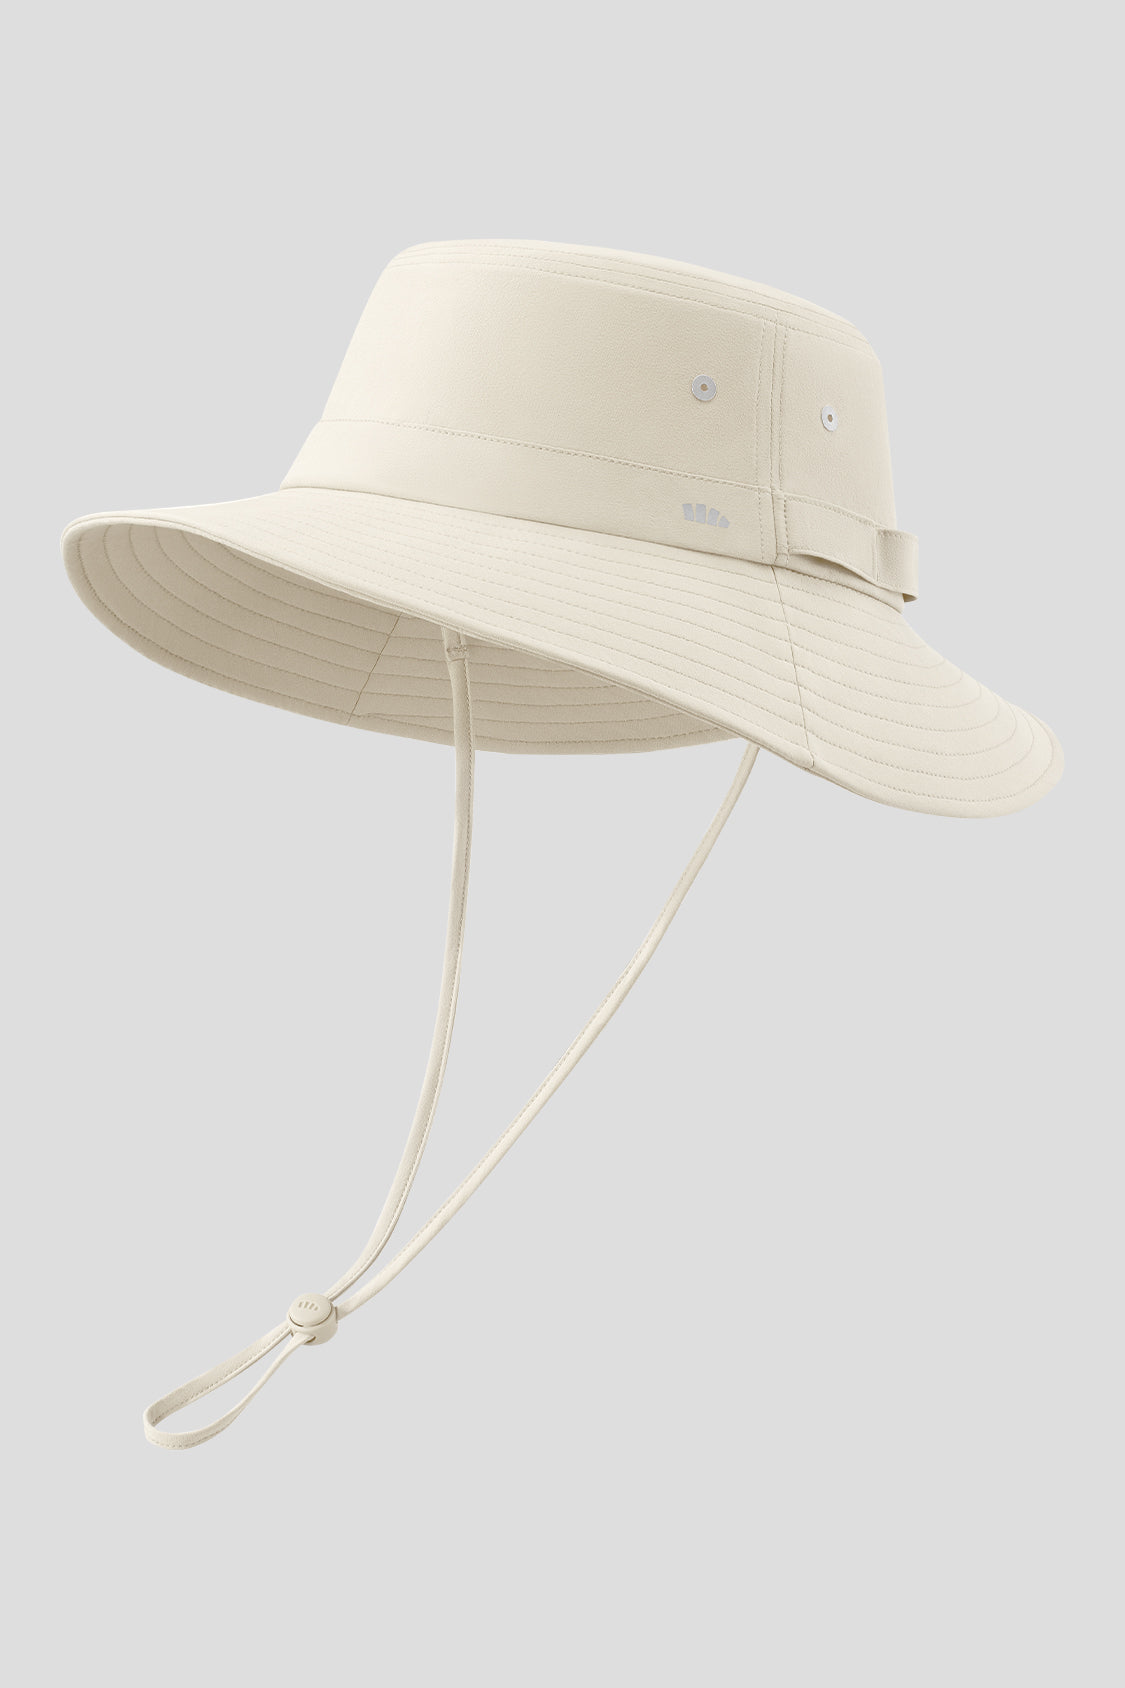 Atee - Men's Water-Resistant Sun Protection Fishing Hat UPF50+